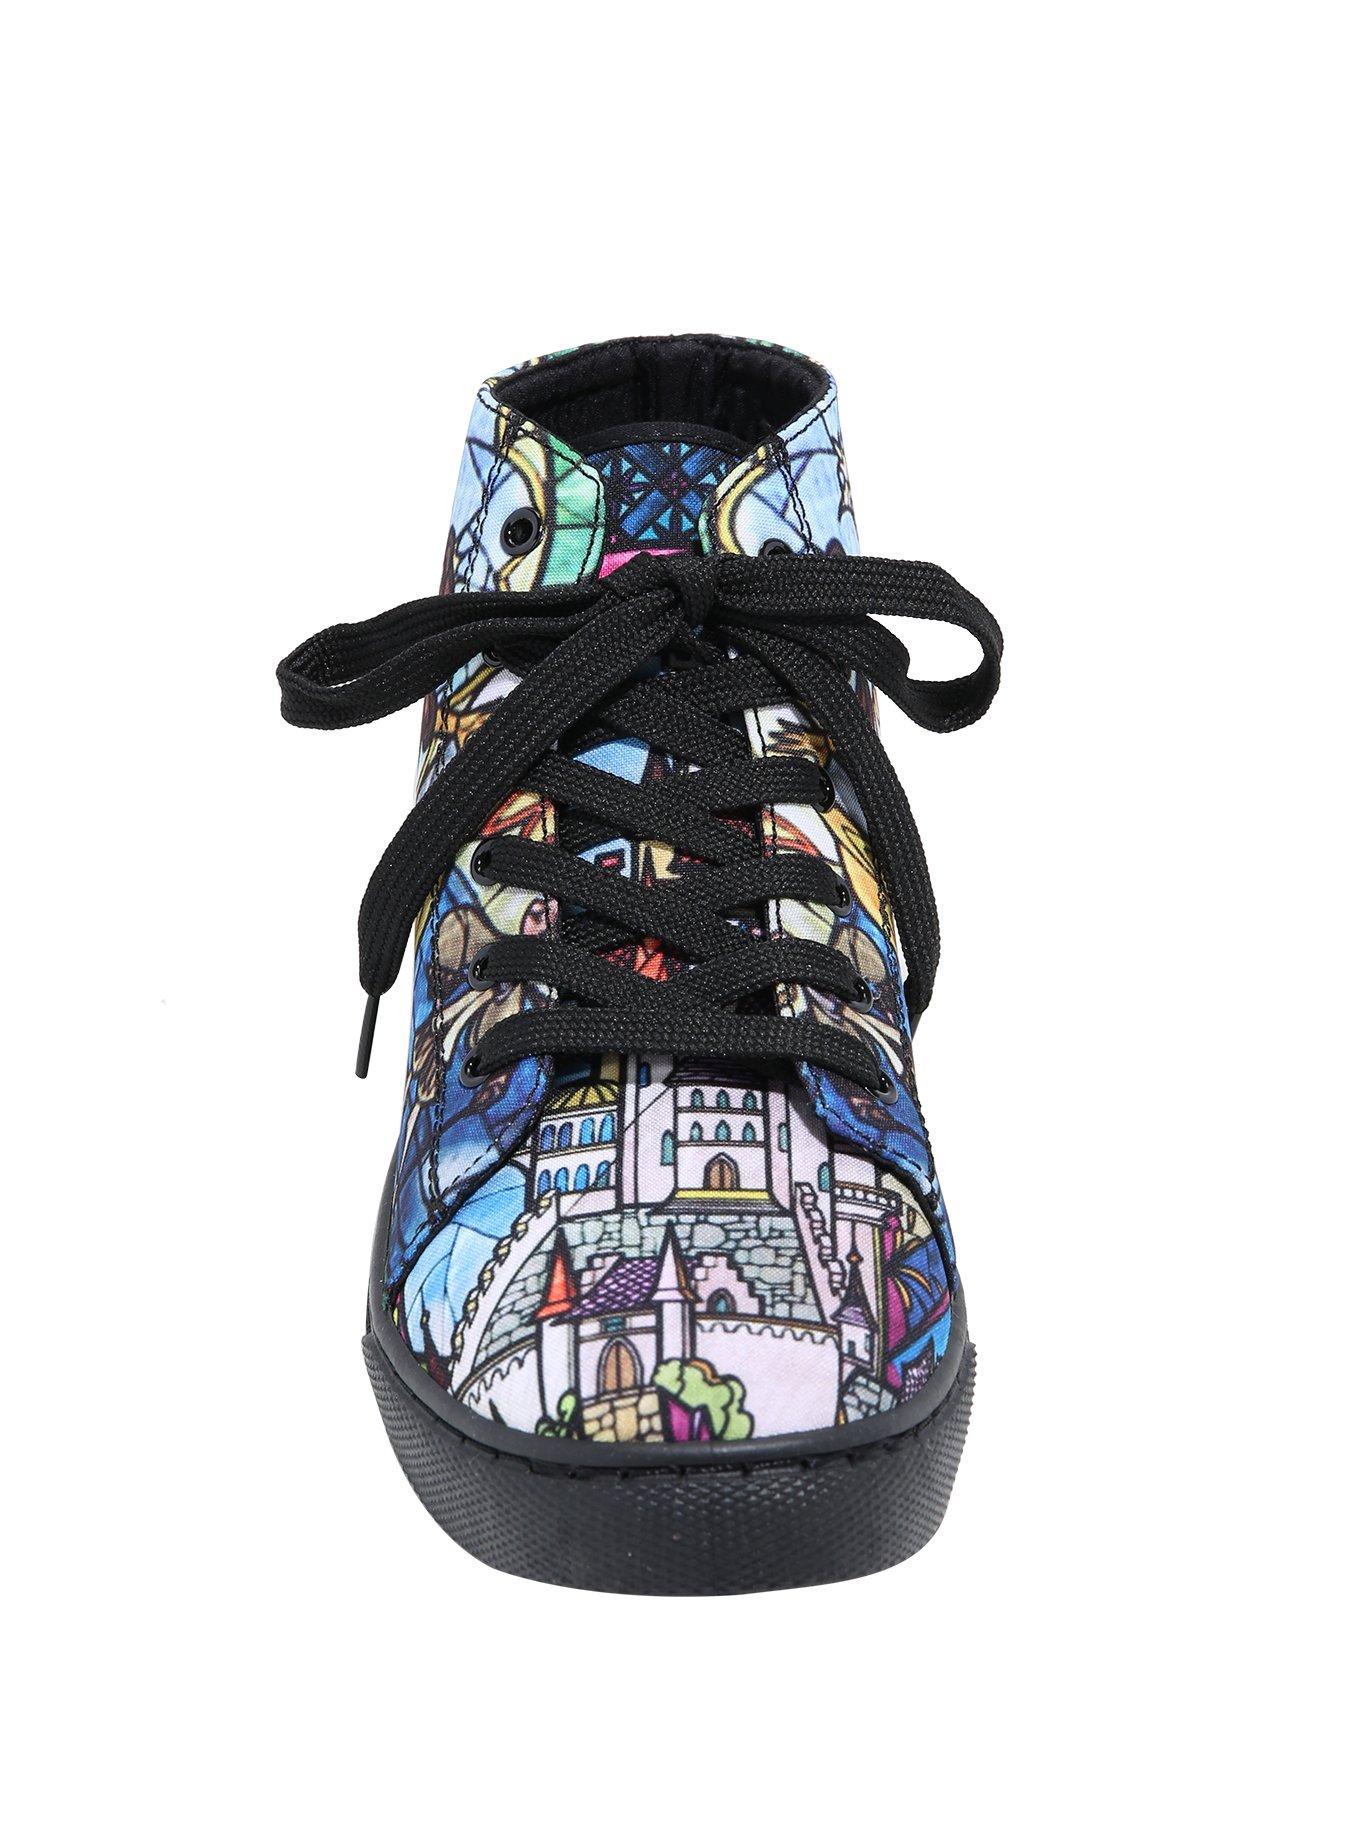 Disney Beauty And The Beast Stained Glass Hi-Top Sneakers, , alternate